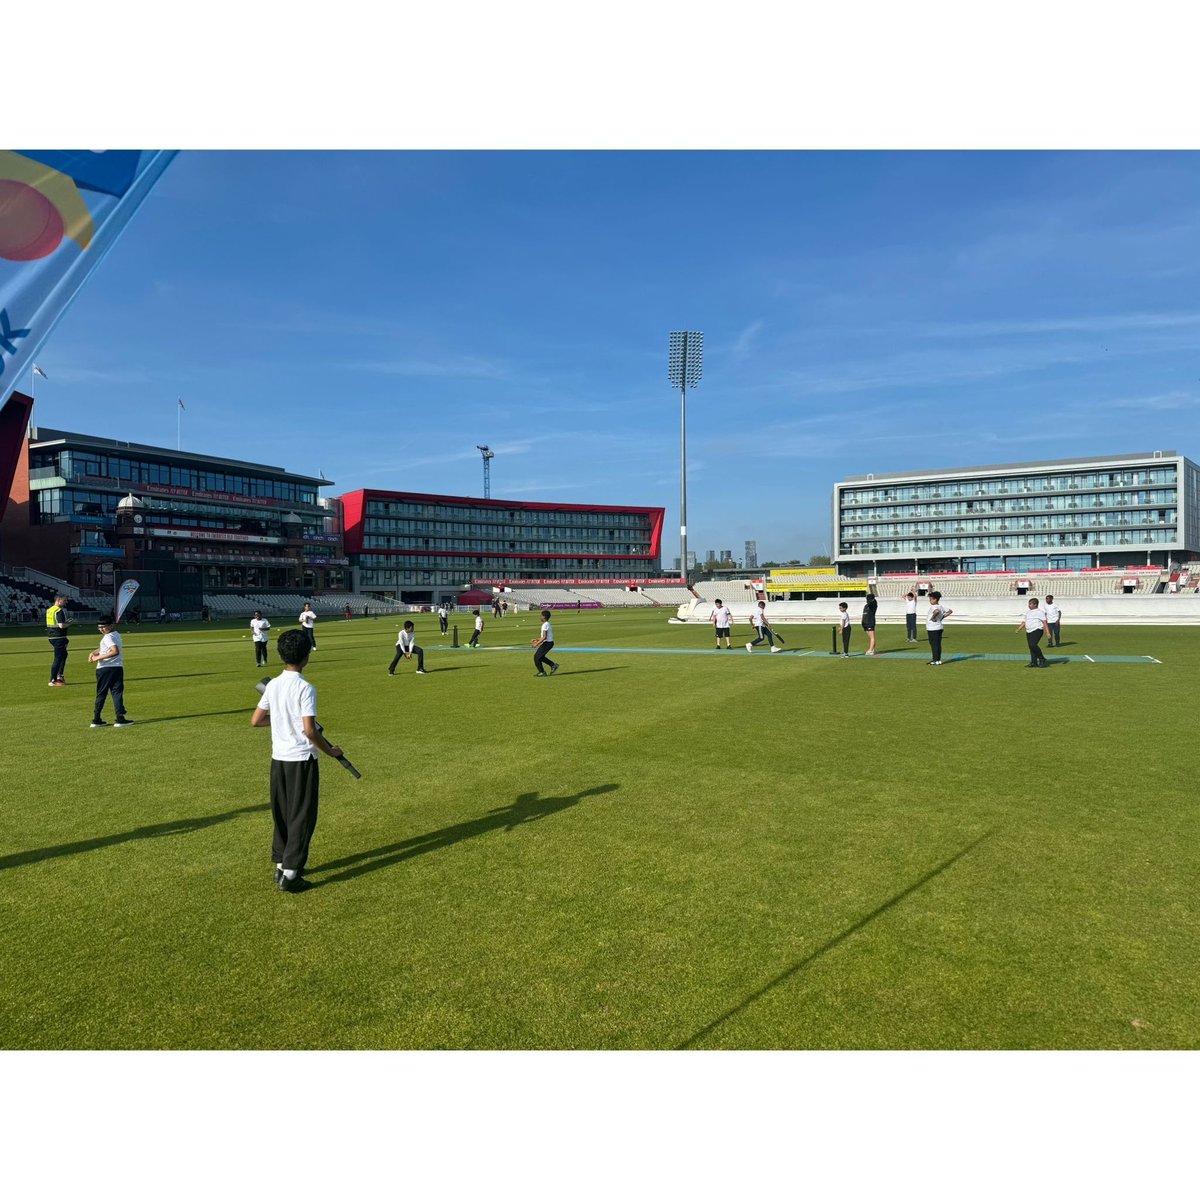 A beautiful day for a wonderful event 🌞 We had a blast down at @emiratesot for the Spirit of Cricket Competition. Great job by @HolyName_School who represented ACE 👏🏾 Fantastic work 🏏 #ACE #ACEProgramme #ACECricket #SpiritOfCricket #CricketLovers #Community #NextGeneration